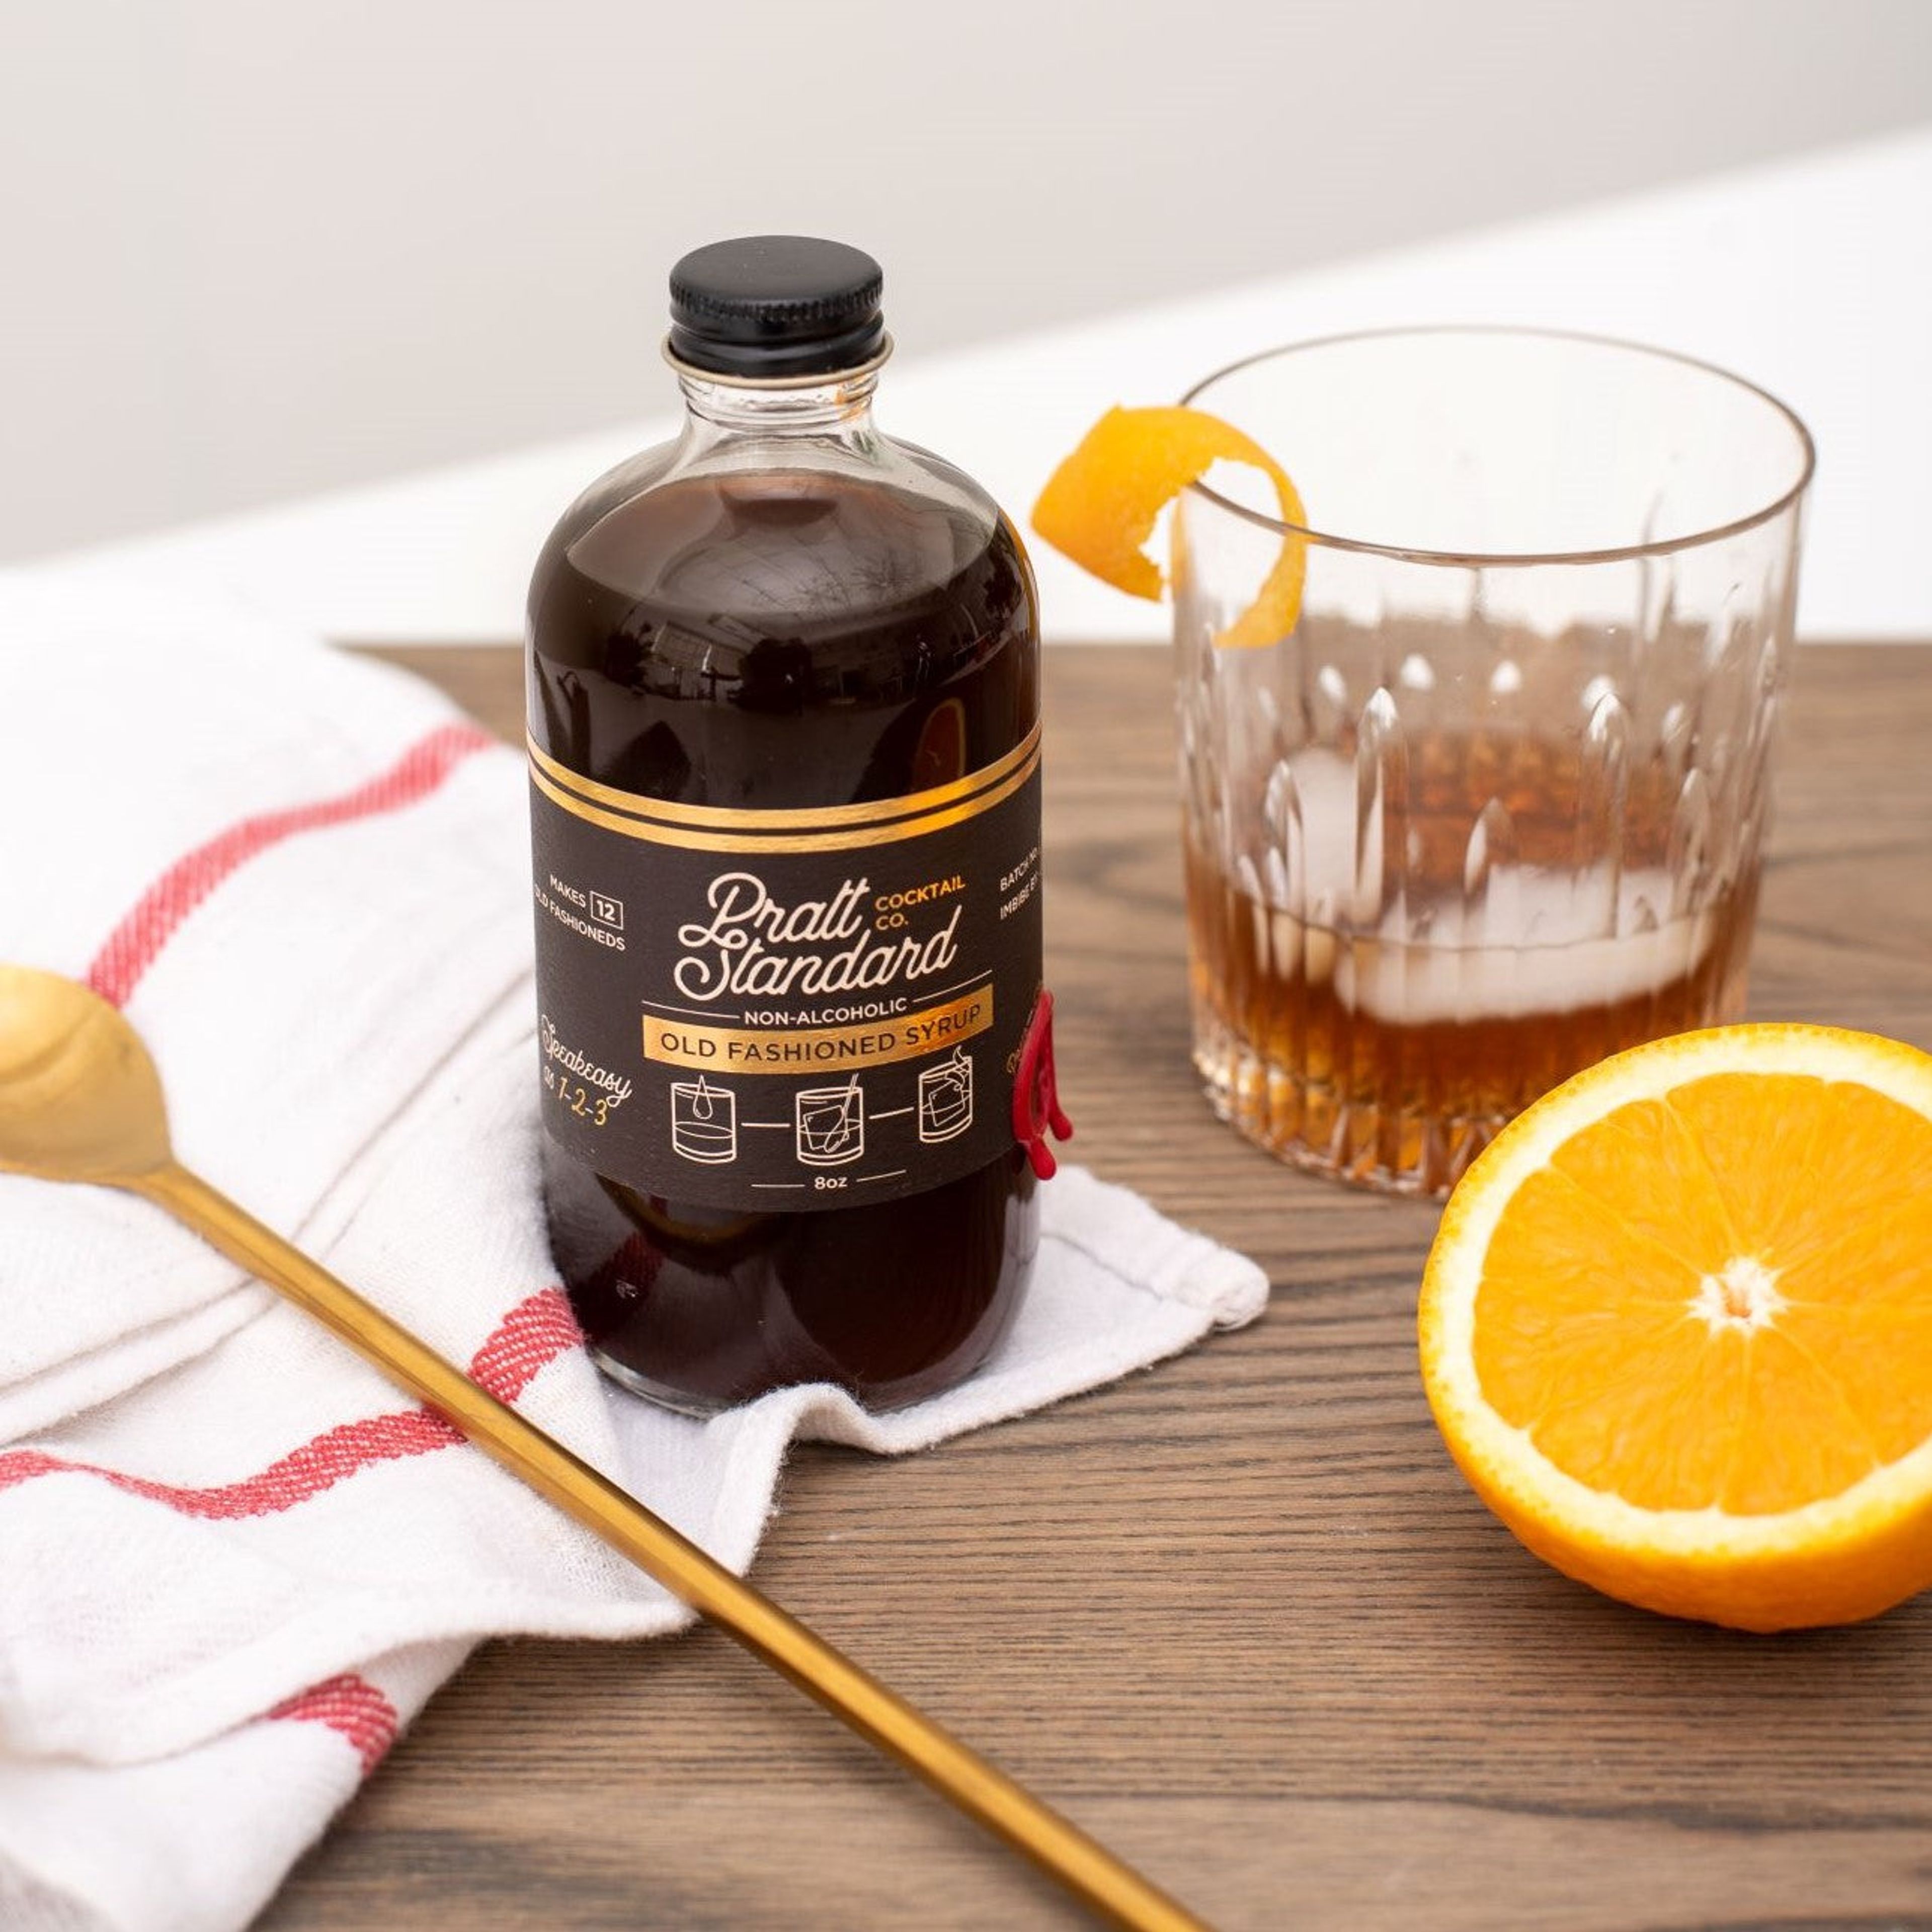 Old Fashioned Syrup - 8oz